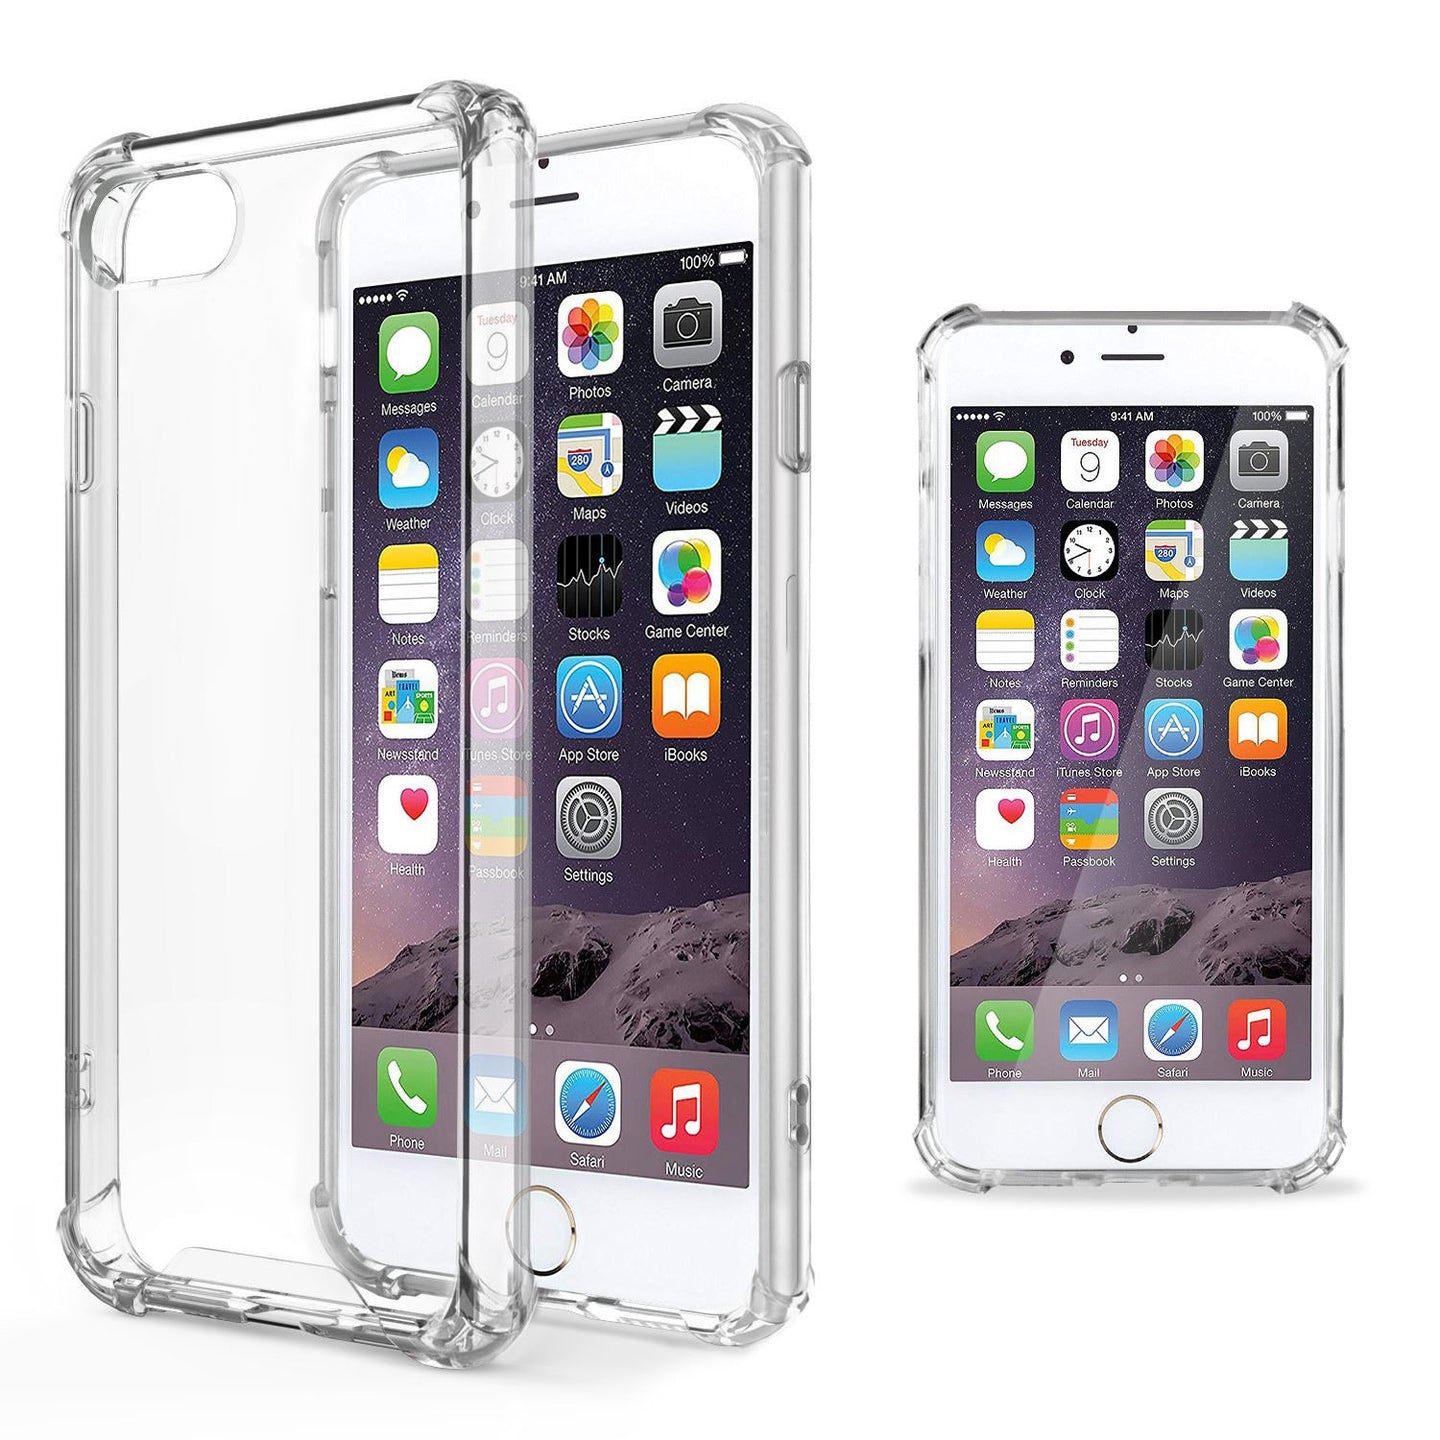 Moozy Shock Proof Silicone Case for iPhone 6, iPhone 6s - Transparent Crystal Clear Phone Case Soft TPU Cover